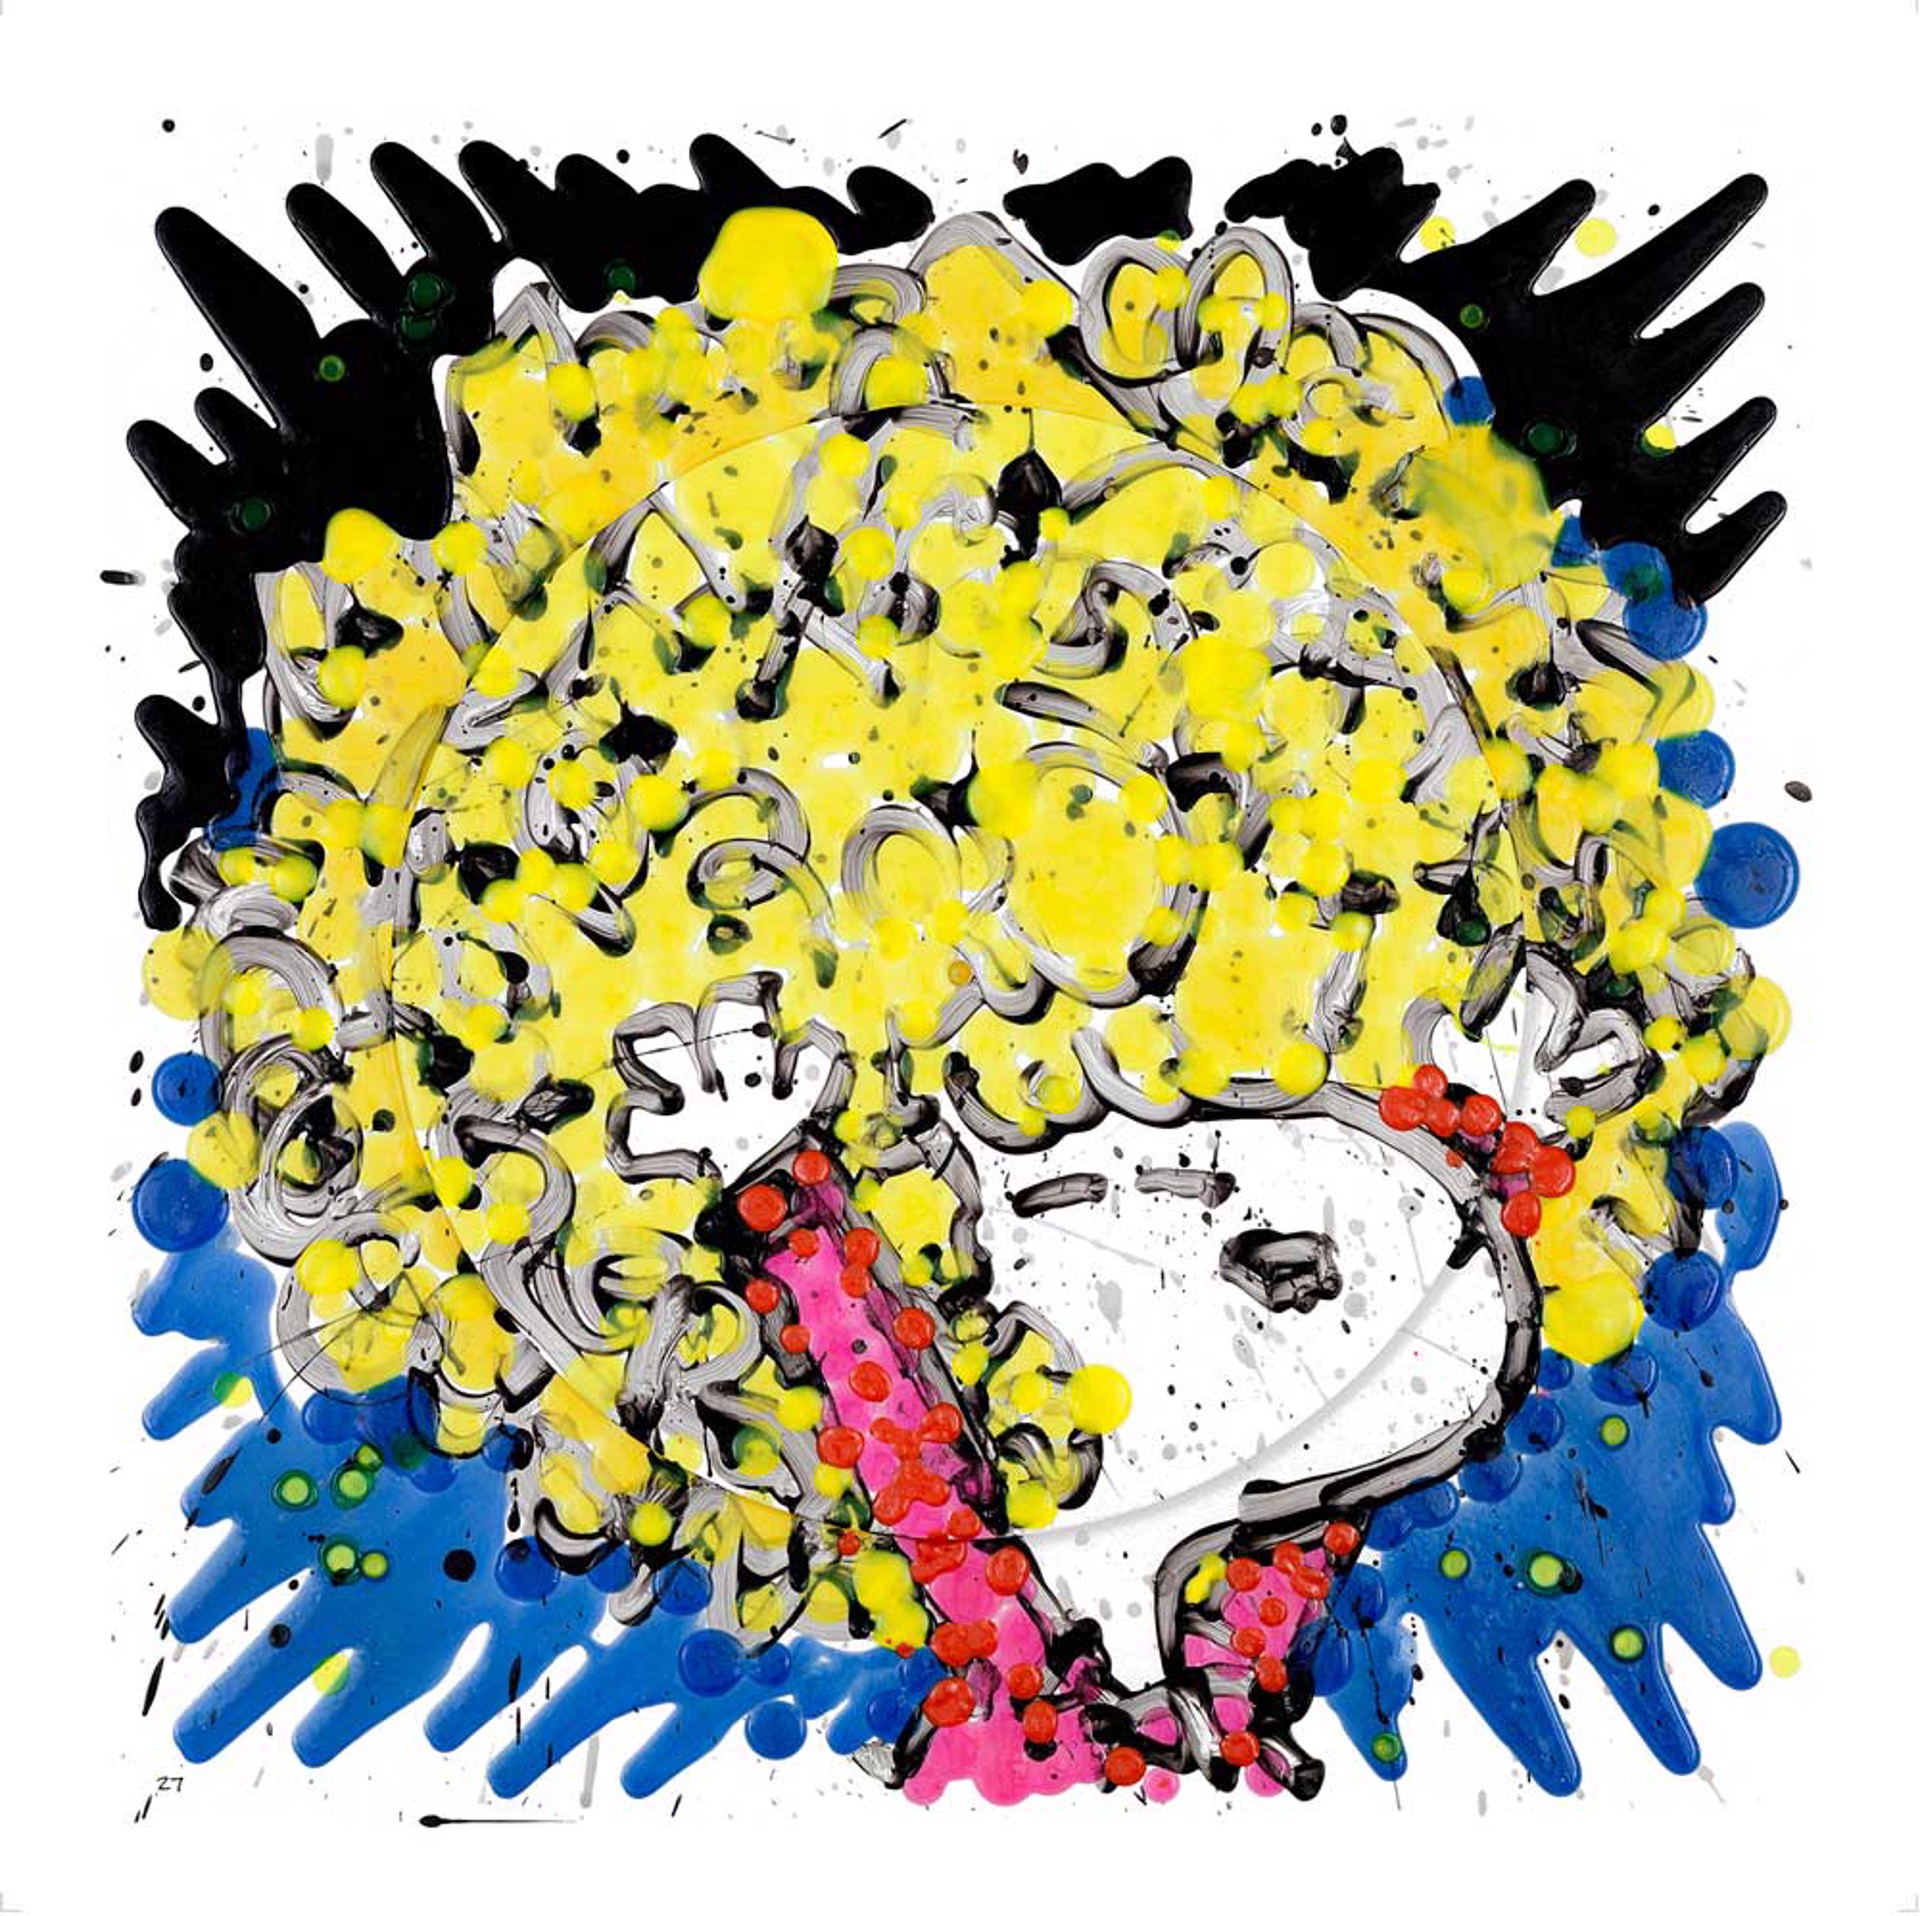 Mirror Mirror On The Wall, Who's The Top Dog Of Them All? by Tom Everhart